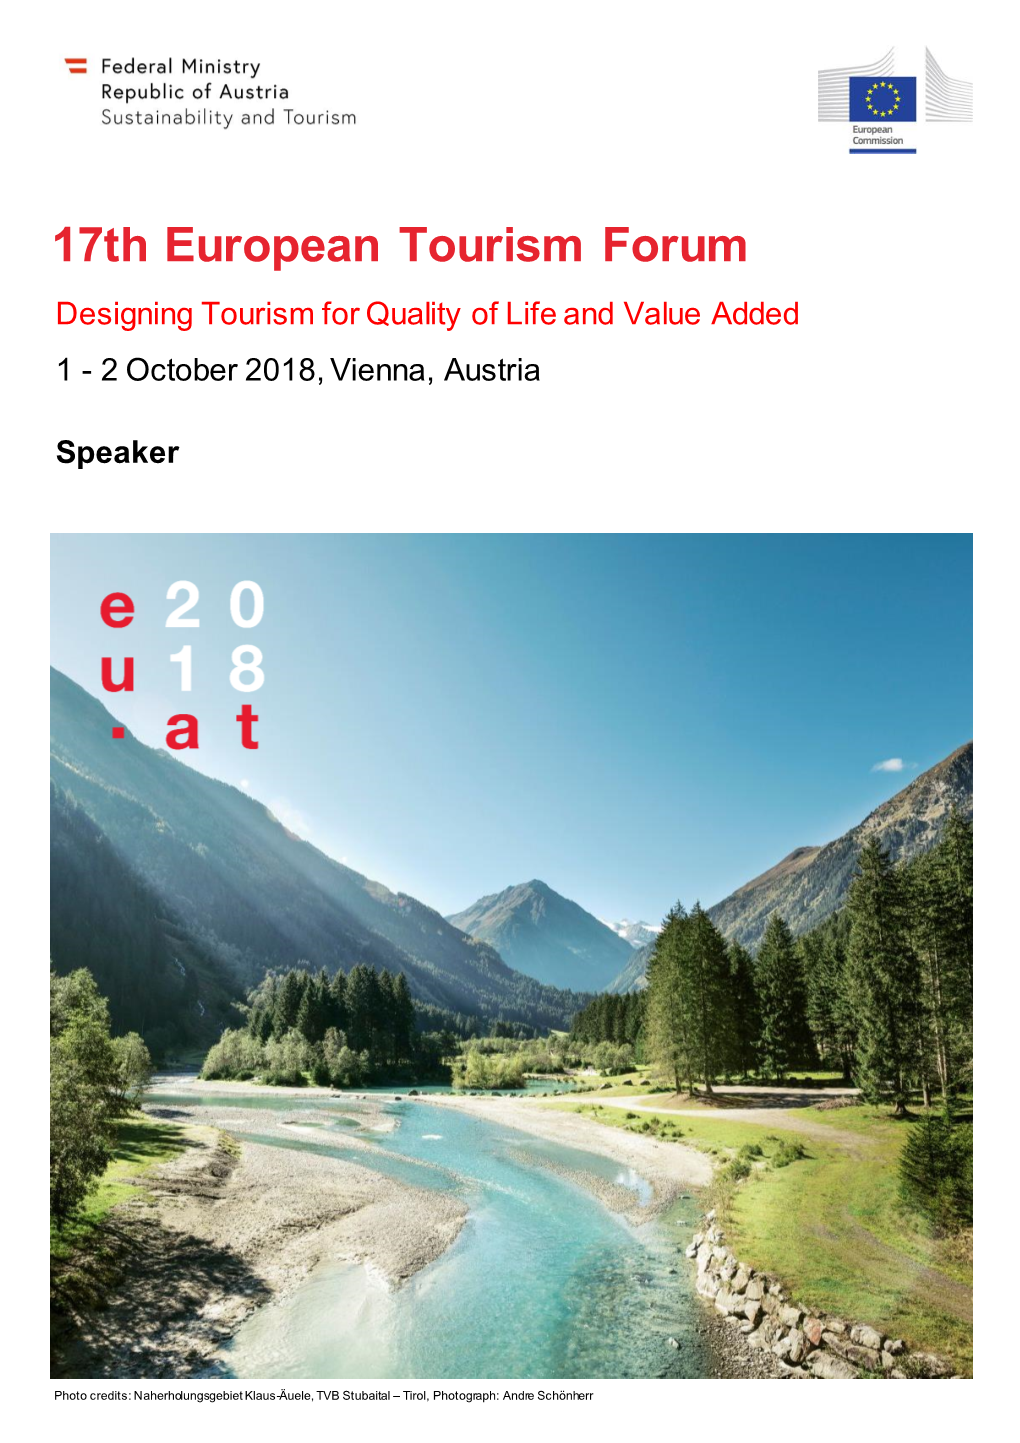 17Th European Tourism Forum Designing Tourism for Quality of Life and Value Added 1 - 2 October 2018, Vienna, Austria